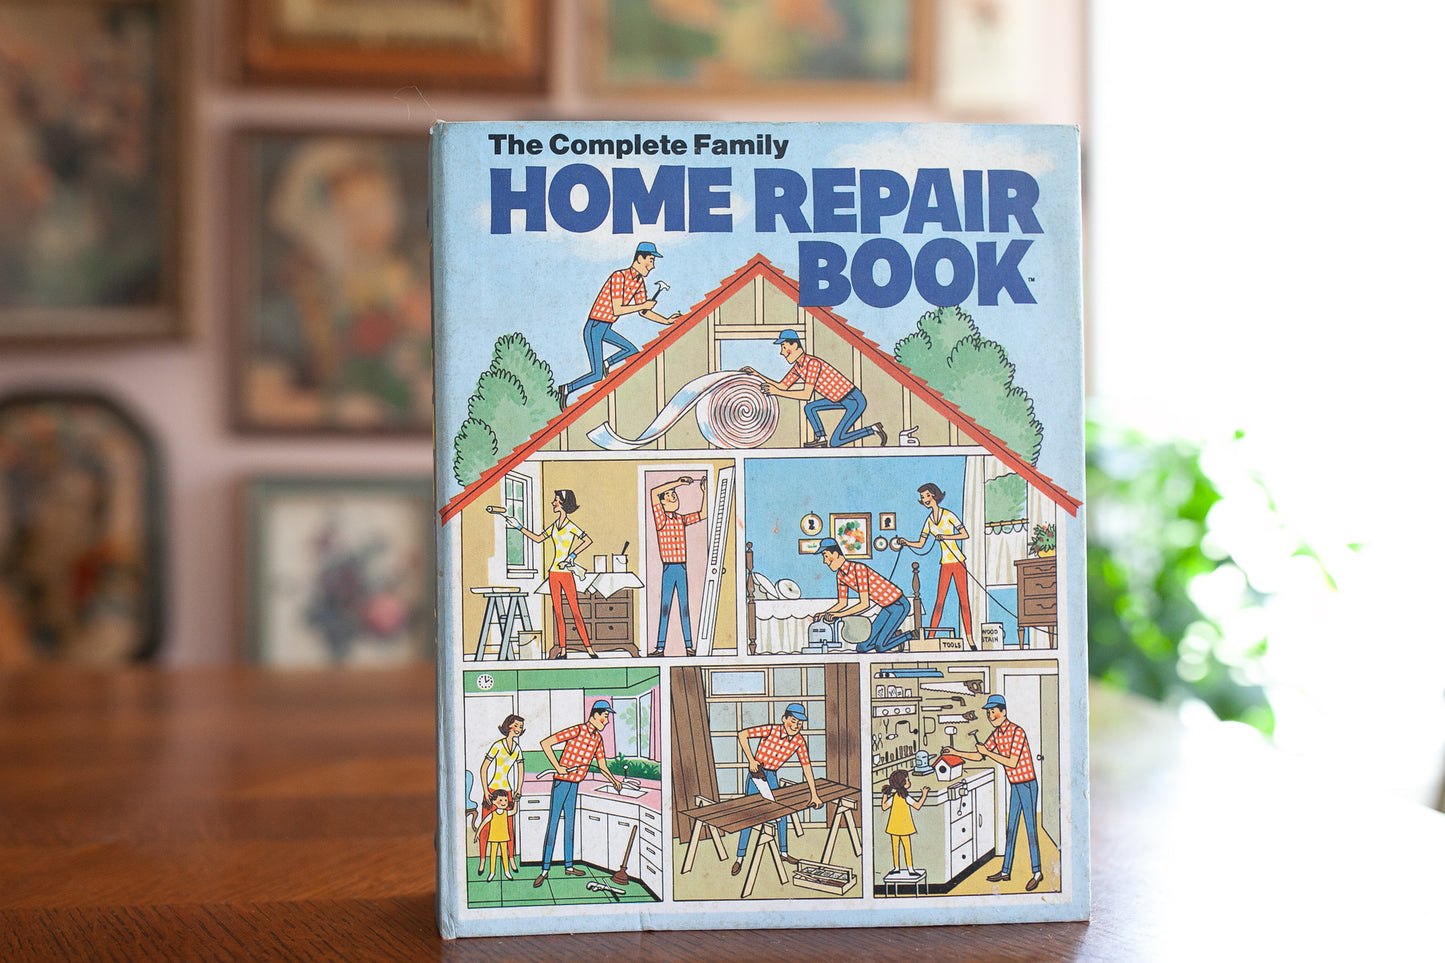 The Complete Family Home Repair Book